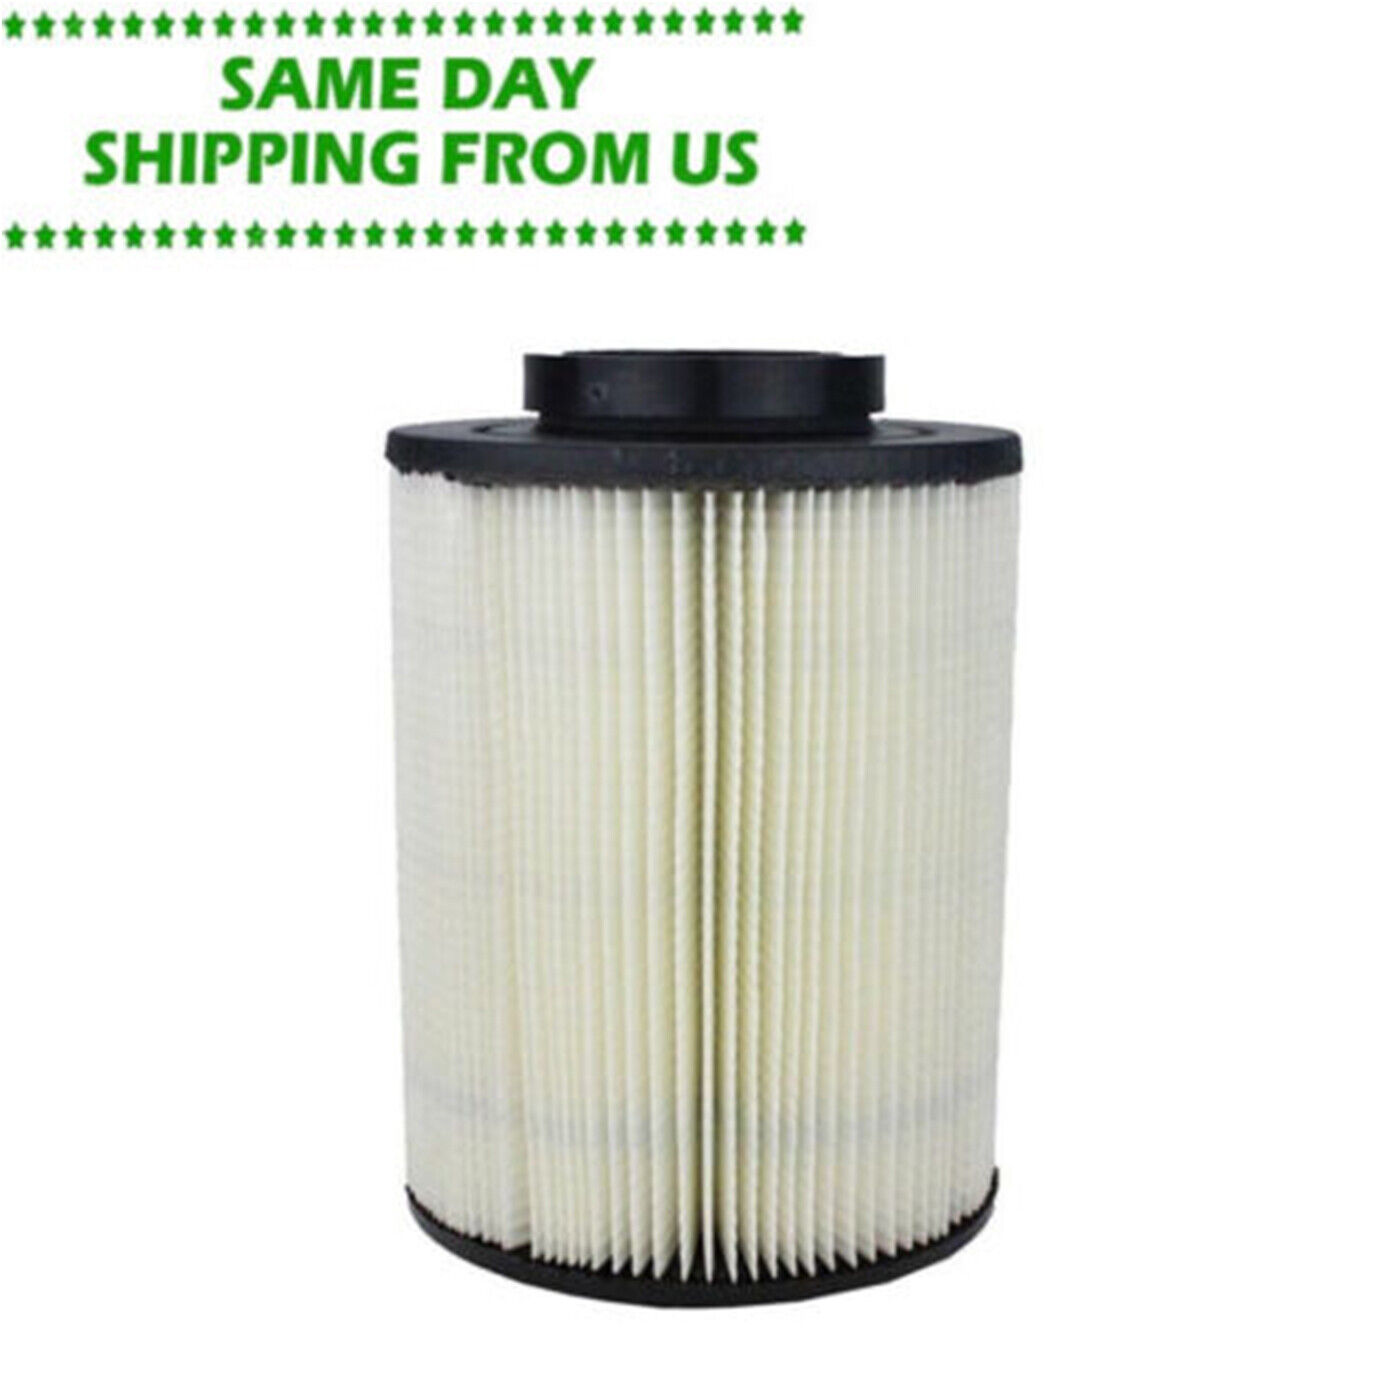 NEW Air Filter For Polaris RZR Ranger 800 (2008-2014)  Replacement  1240482